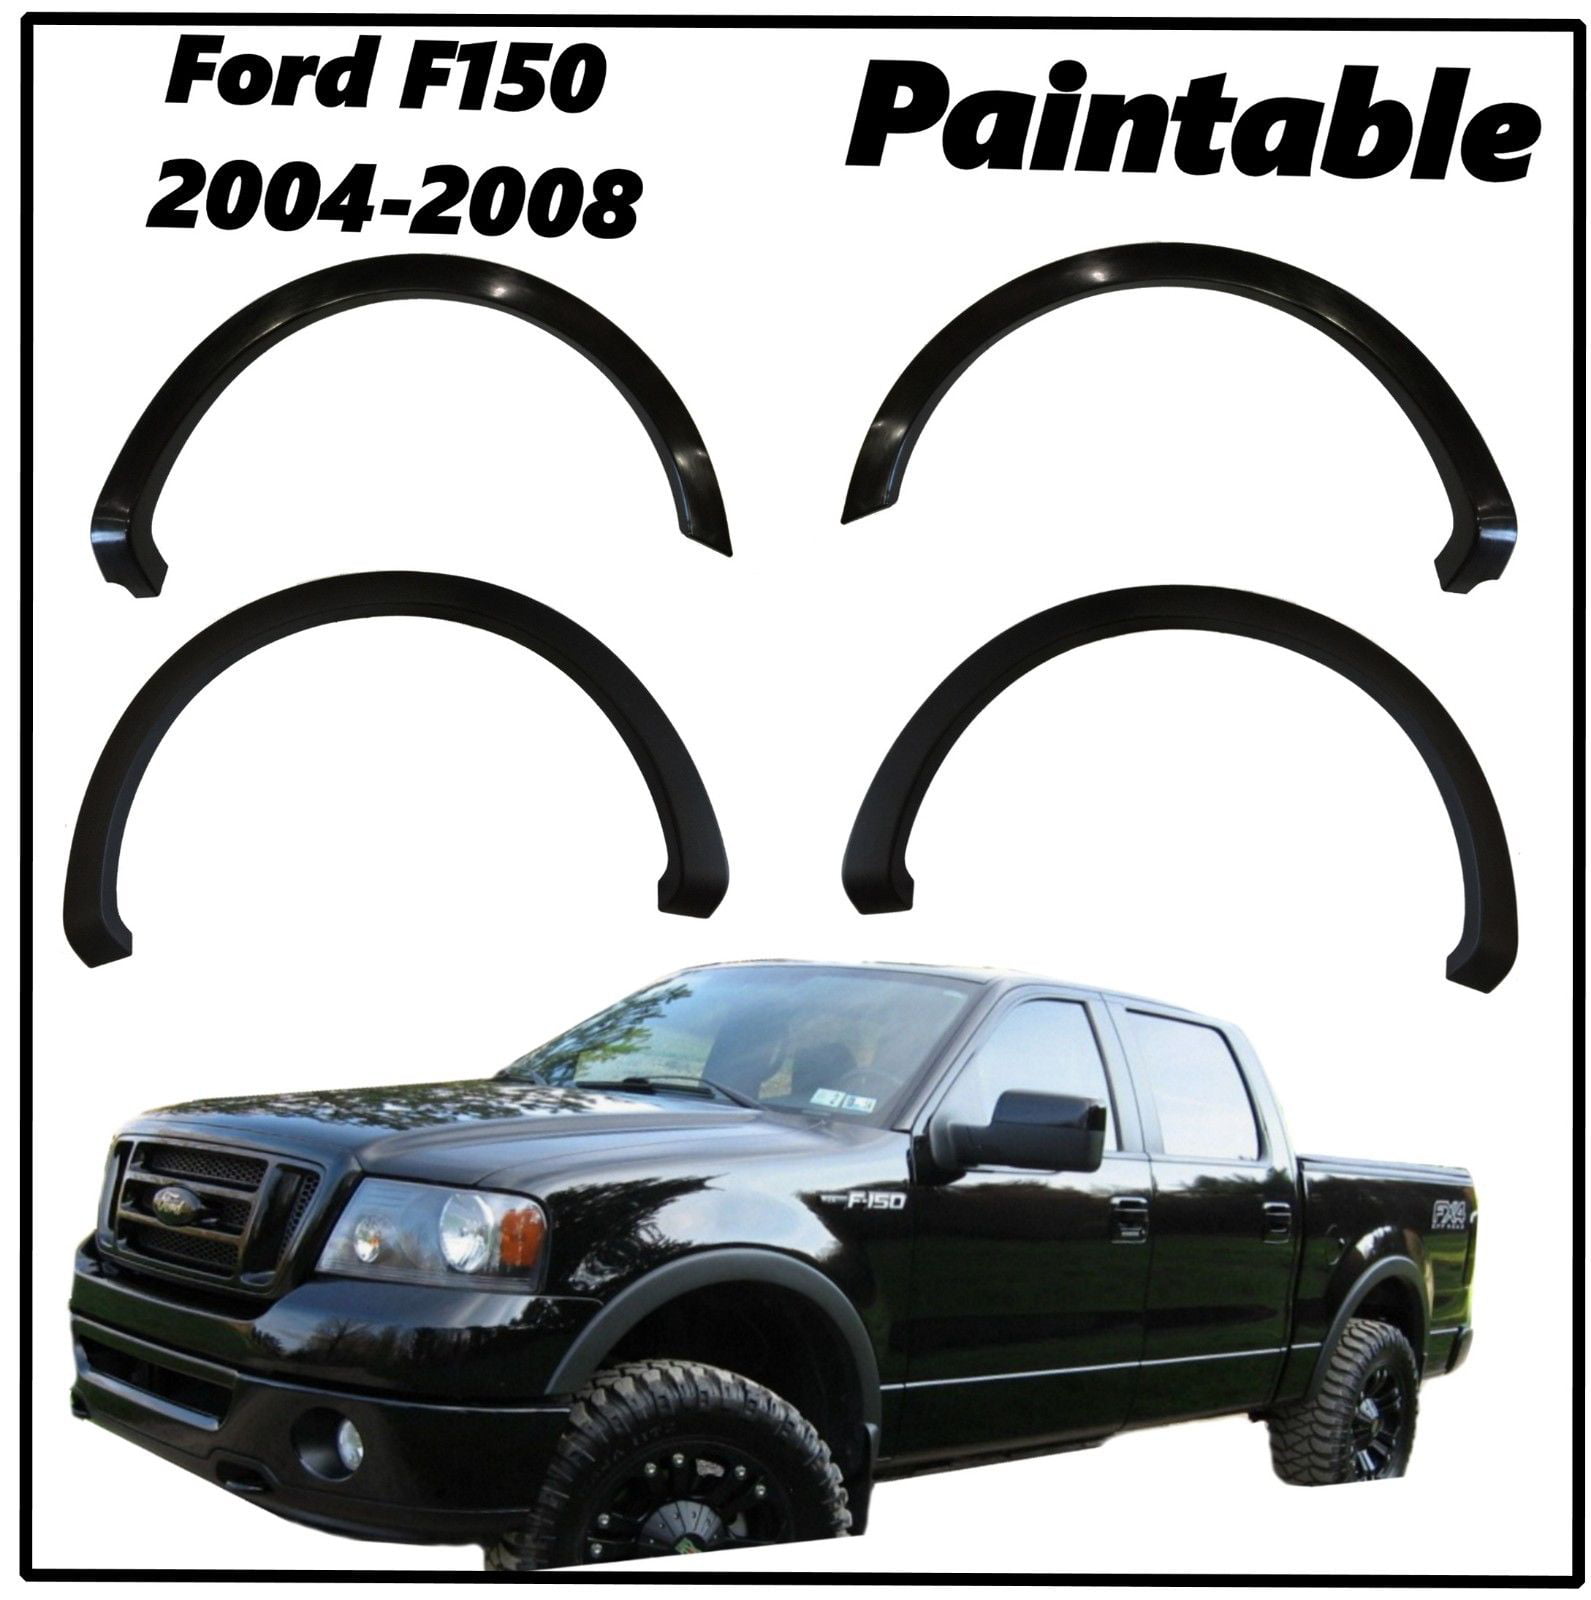 Works with 2004-2008 Ford F-150 Crew Cab 6.5 Short Bed Without Fender Flare Rocker Panel Trim Body Side Moulding 7 Wide 12PC Made in USA 